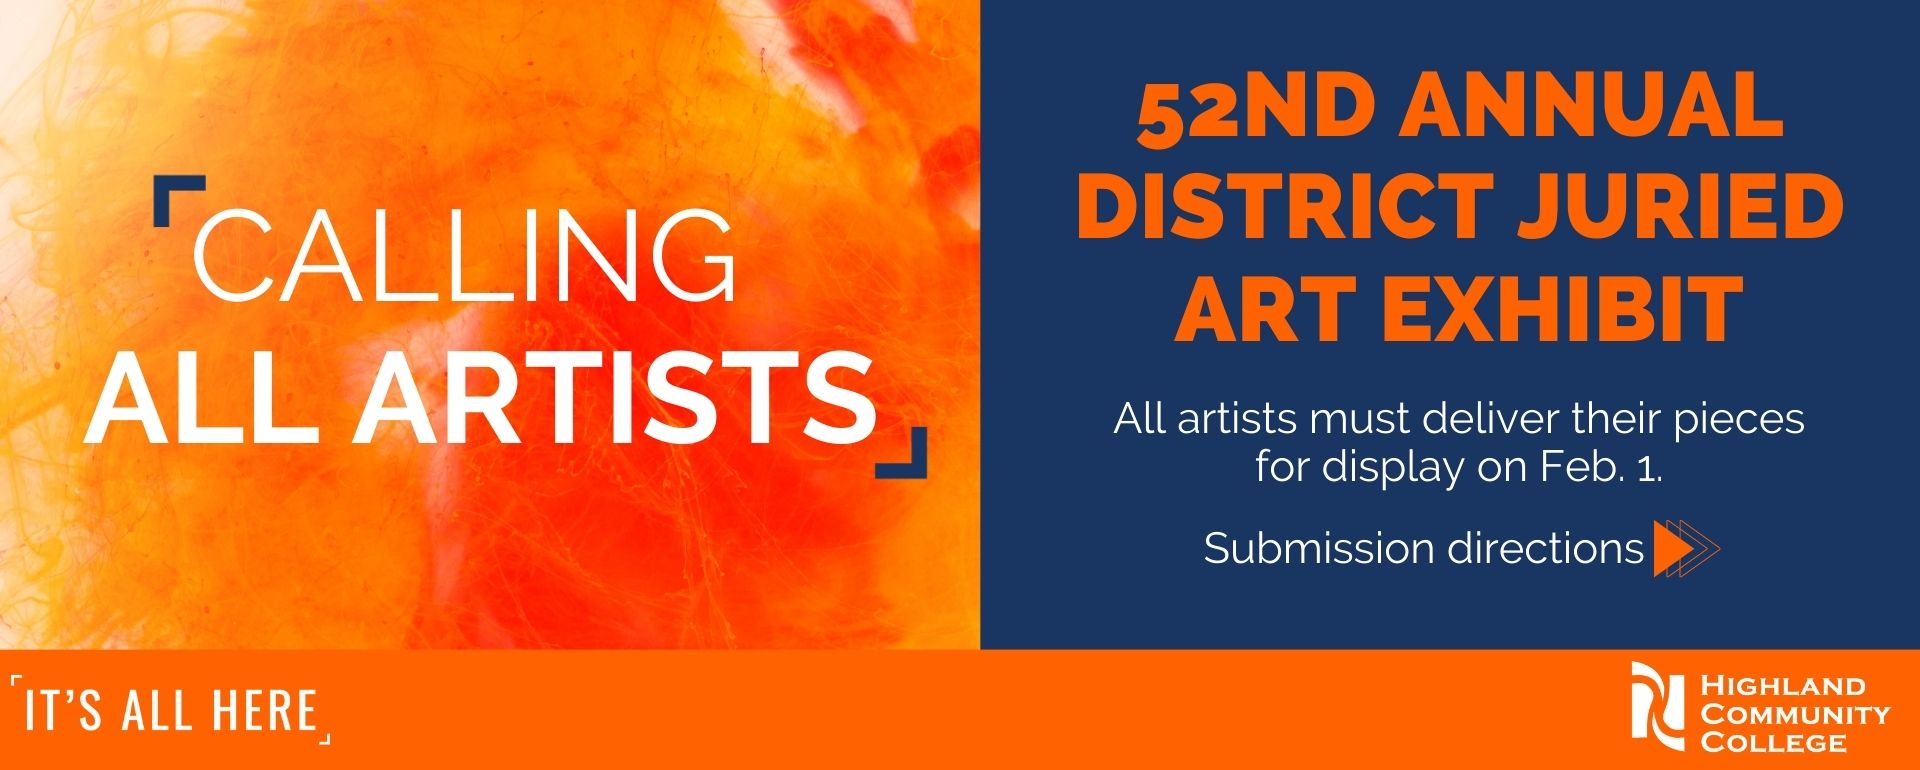 Calling all artists for submission into the 52nd annual district juried art exhibit! All Artists must deliver their pieces for display on Feb. 1. Click here for submission directions. Image includes text and Calling all Artists over an orange watercolor background.